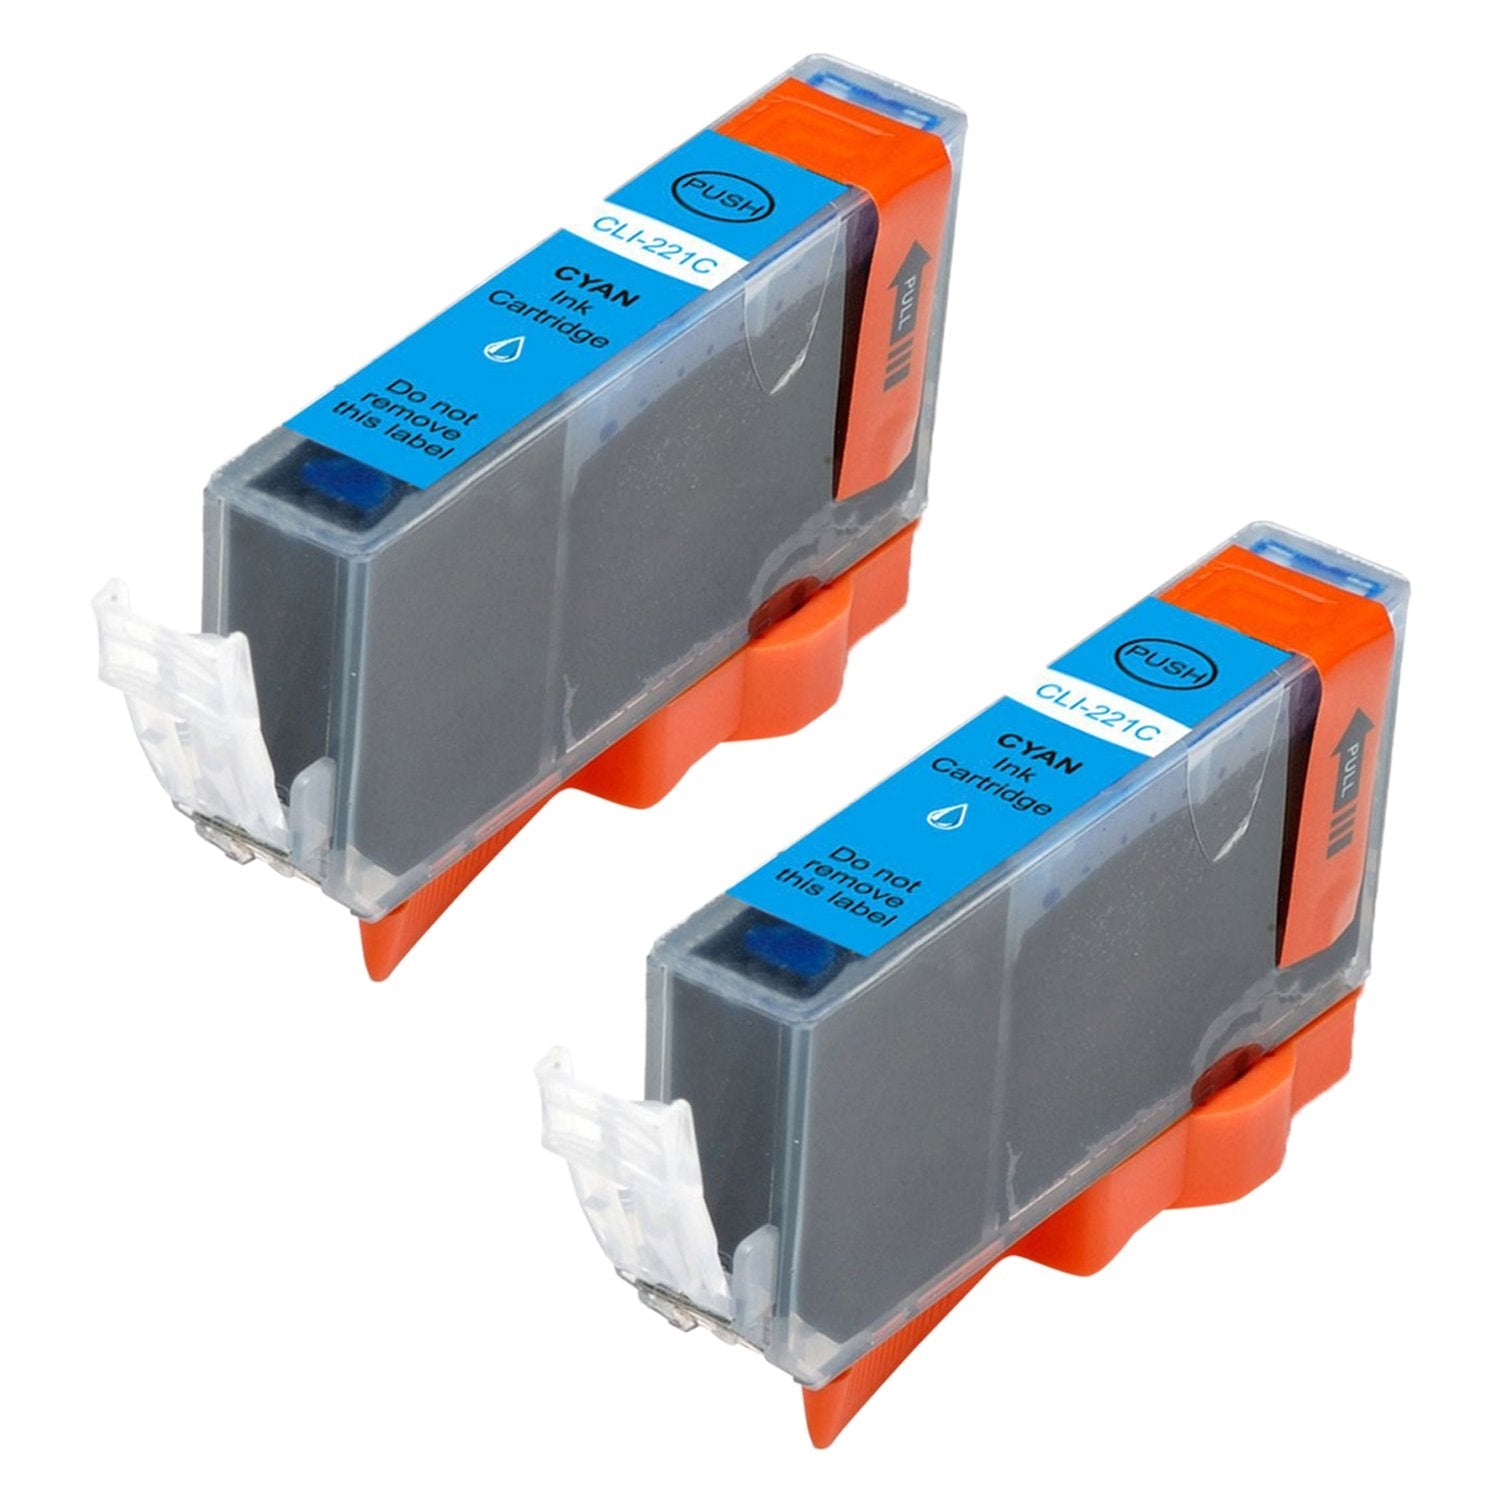 Absolute Toner Canon CLI-221C (2947B001) Compatible Cyan Ink Cartridges | Absolute Toner Canon Ink Cartridges